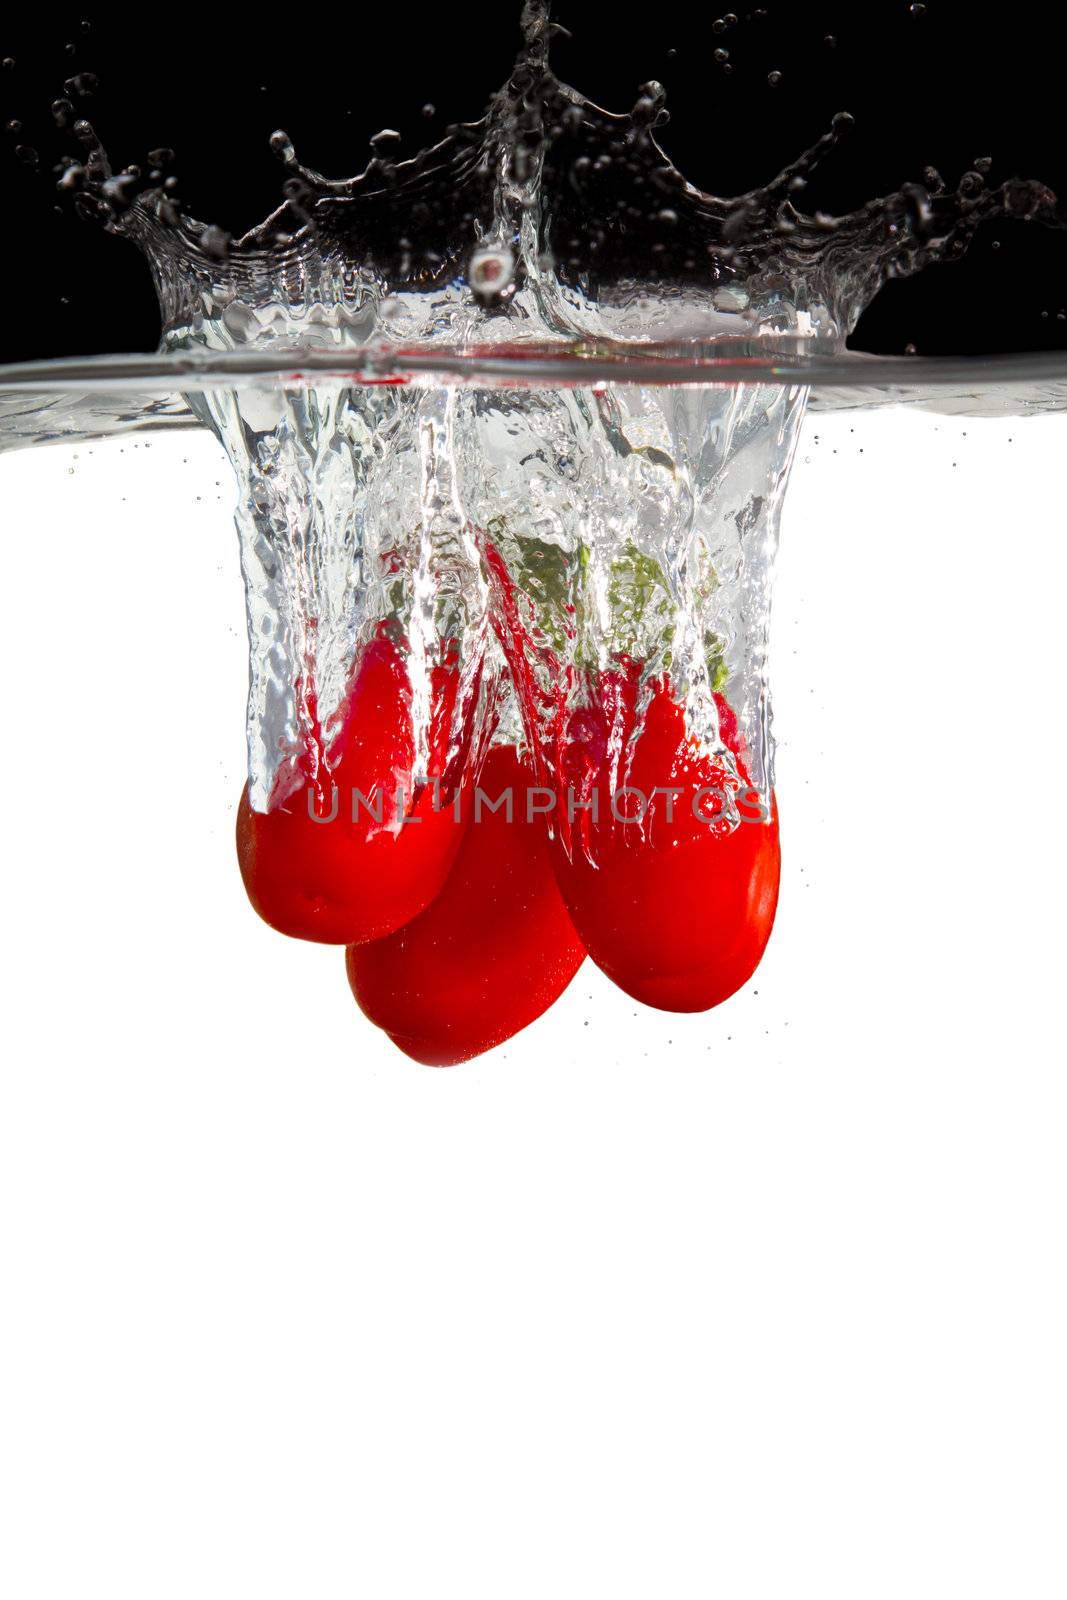 some tomatos in water by RobStark